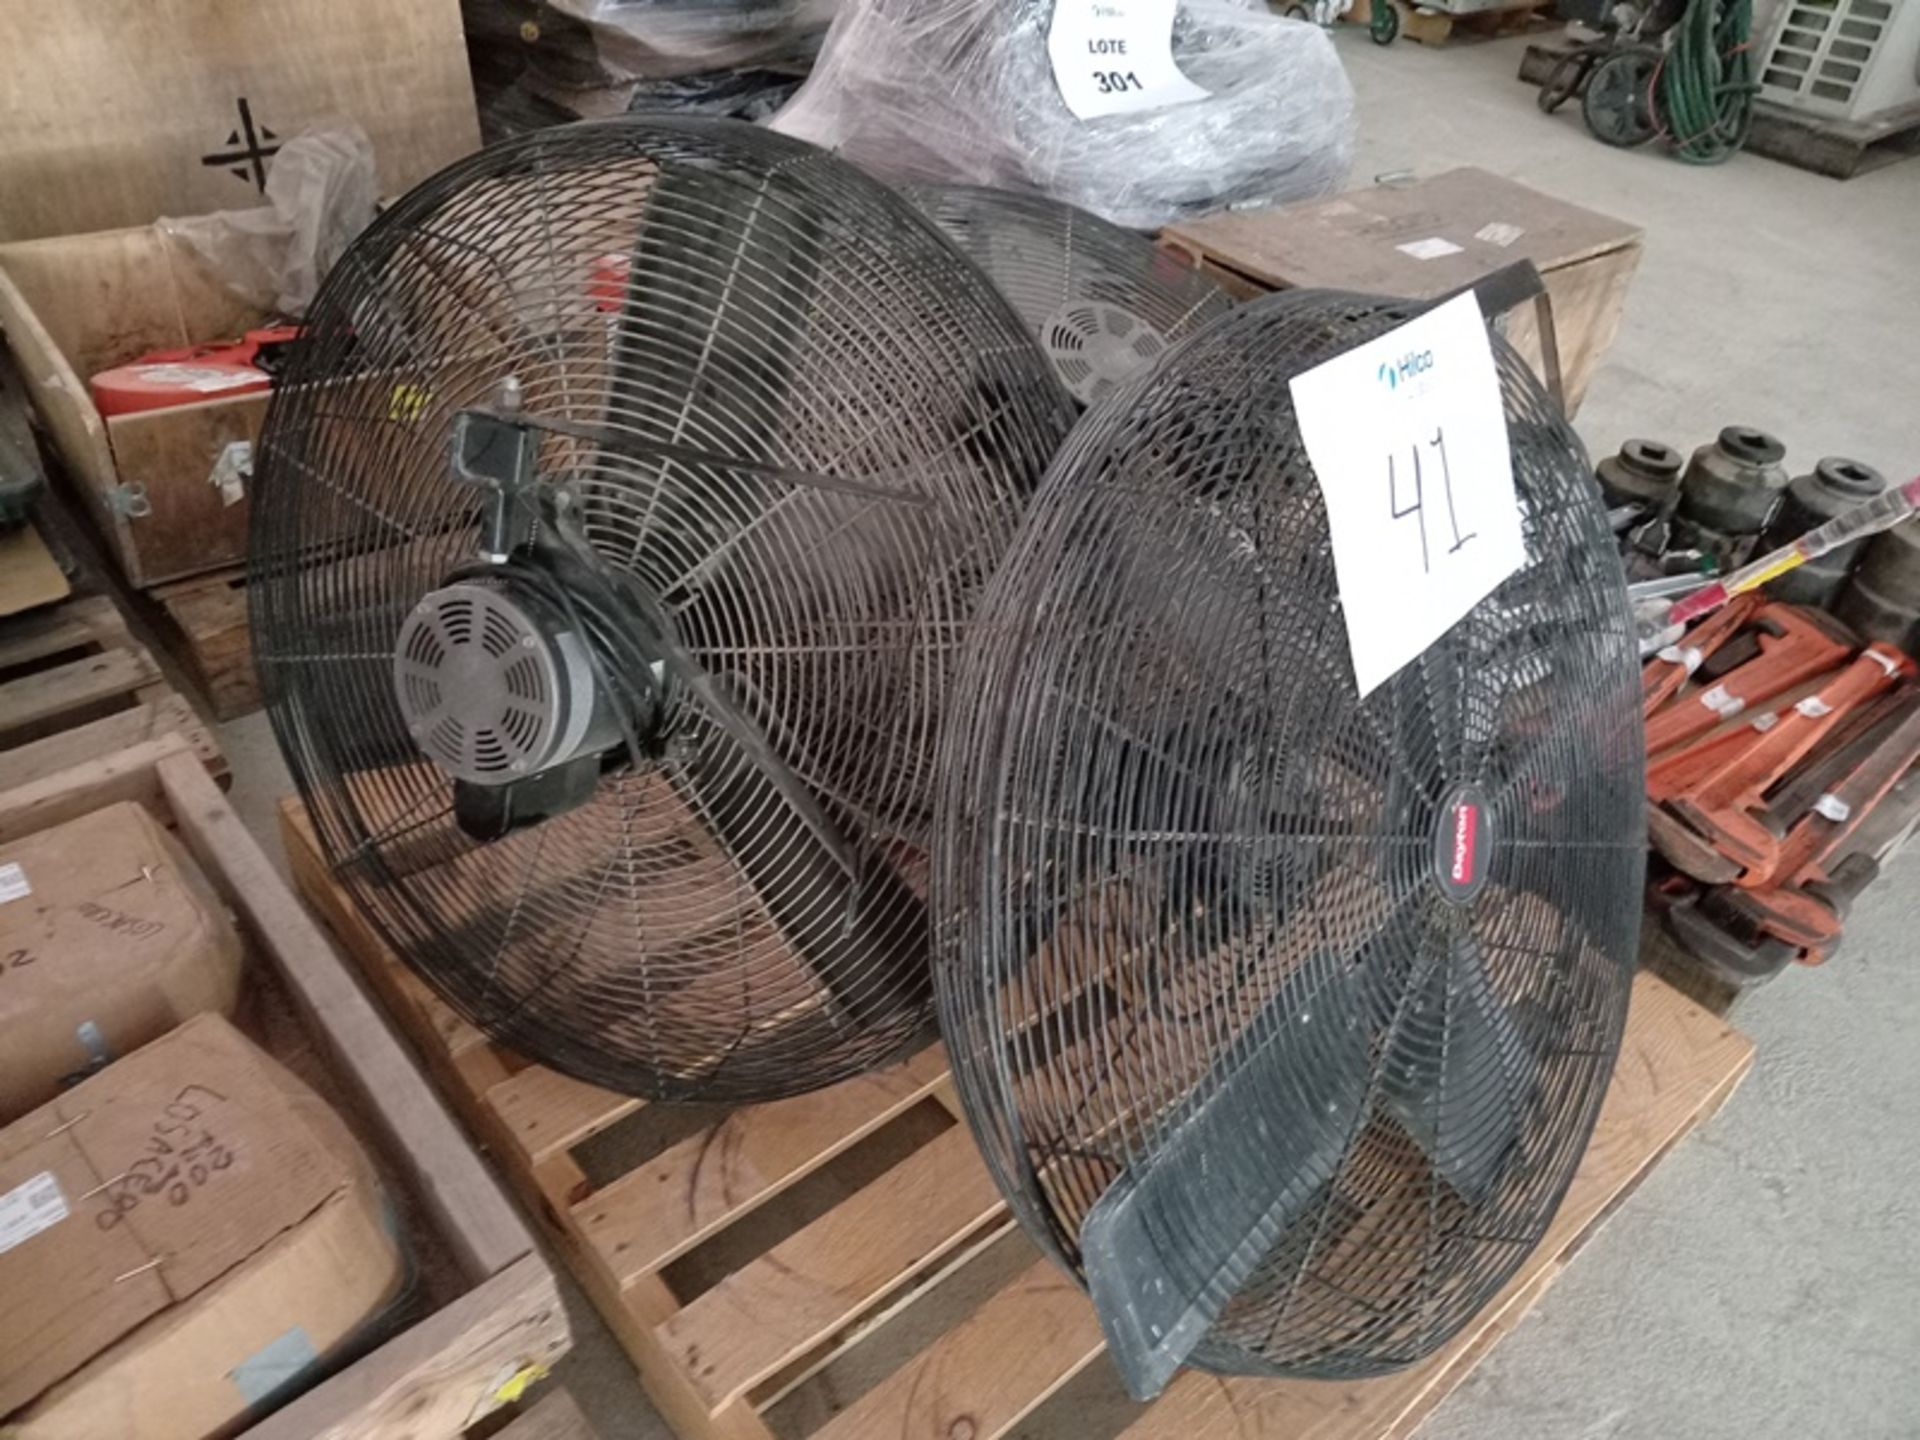 LOT OF (4) WALL MOUNTED INDUSTRIAL FANS - Image 3 of 7